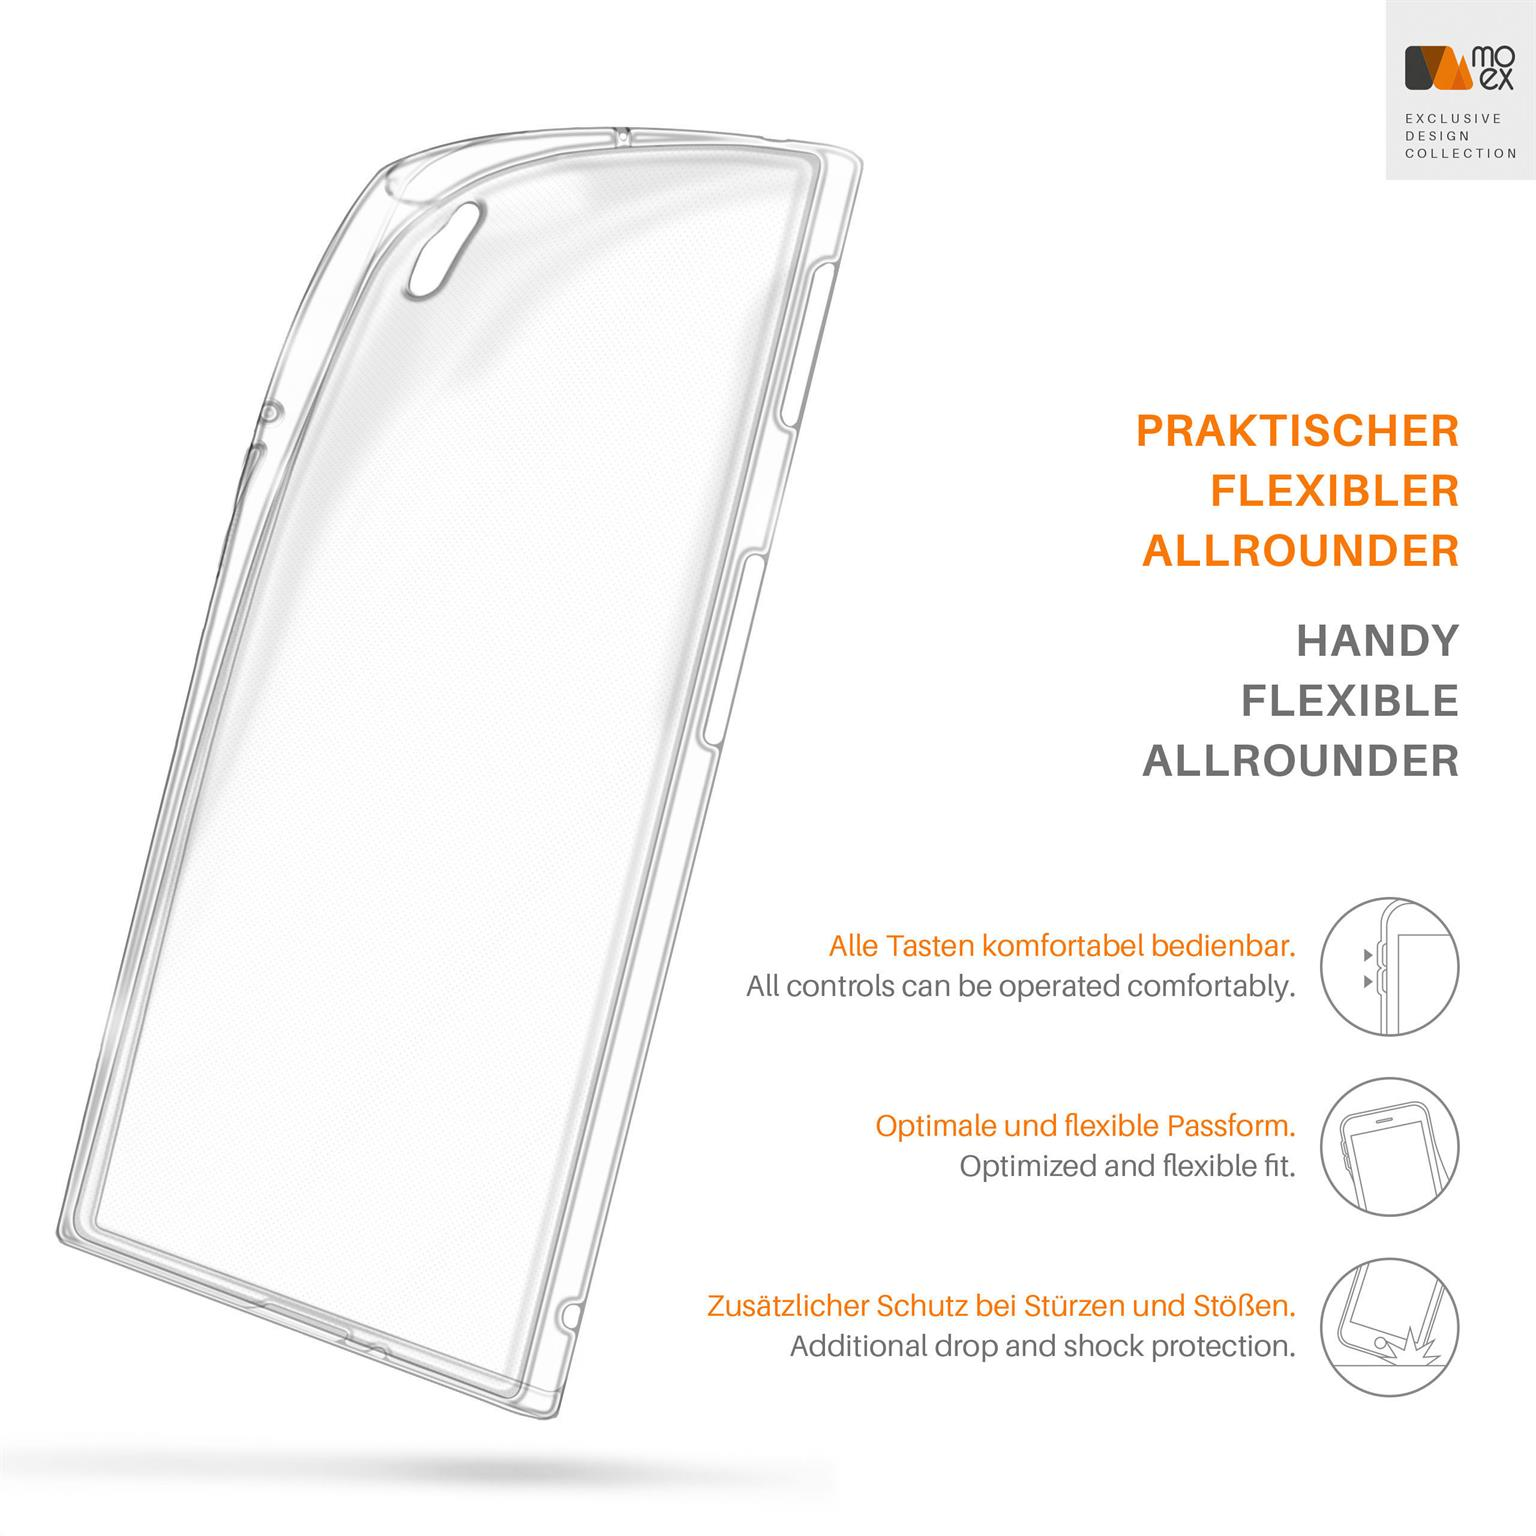 MOEX Aero Case, Backcover, Sony, Z2, Crystal-Clear Xperia